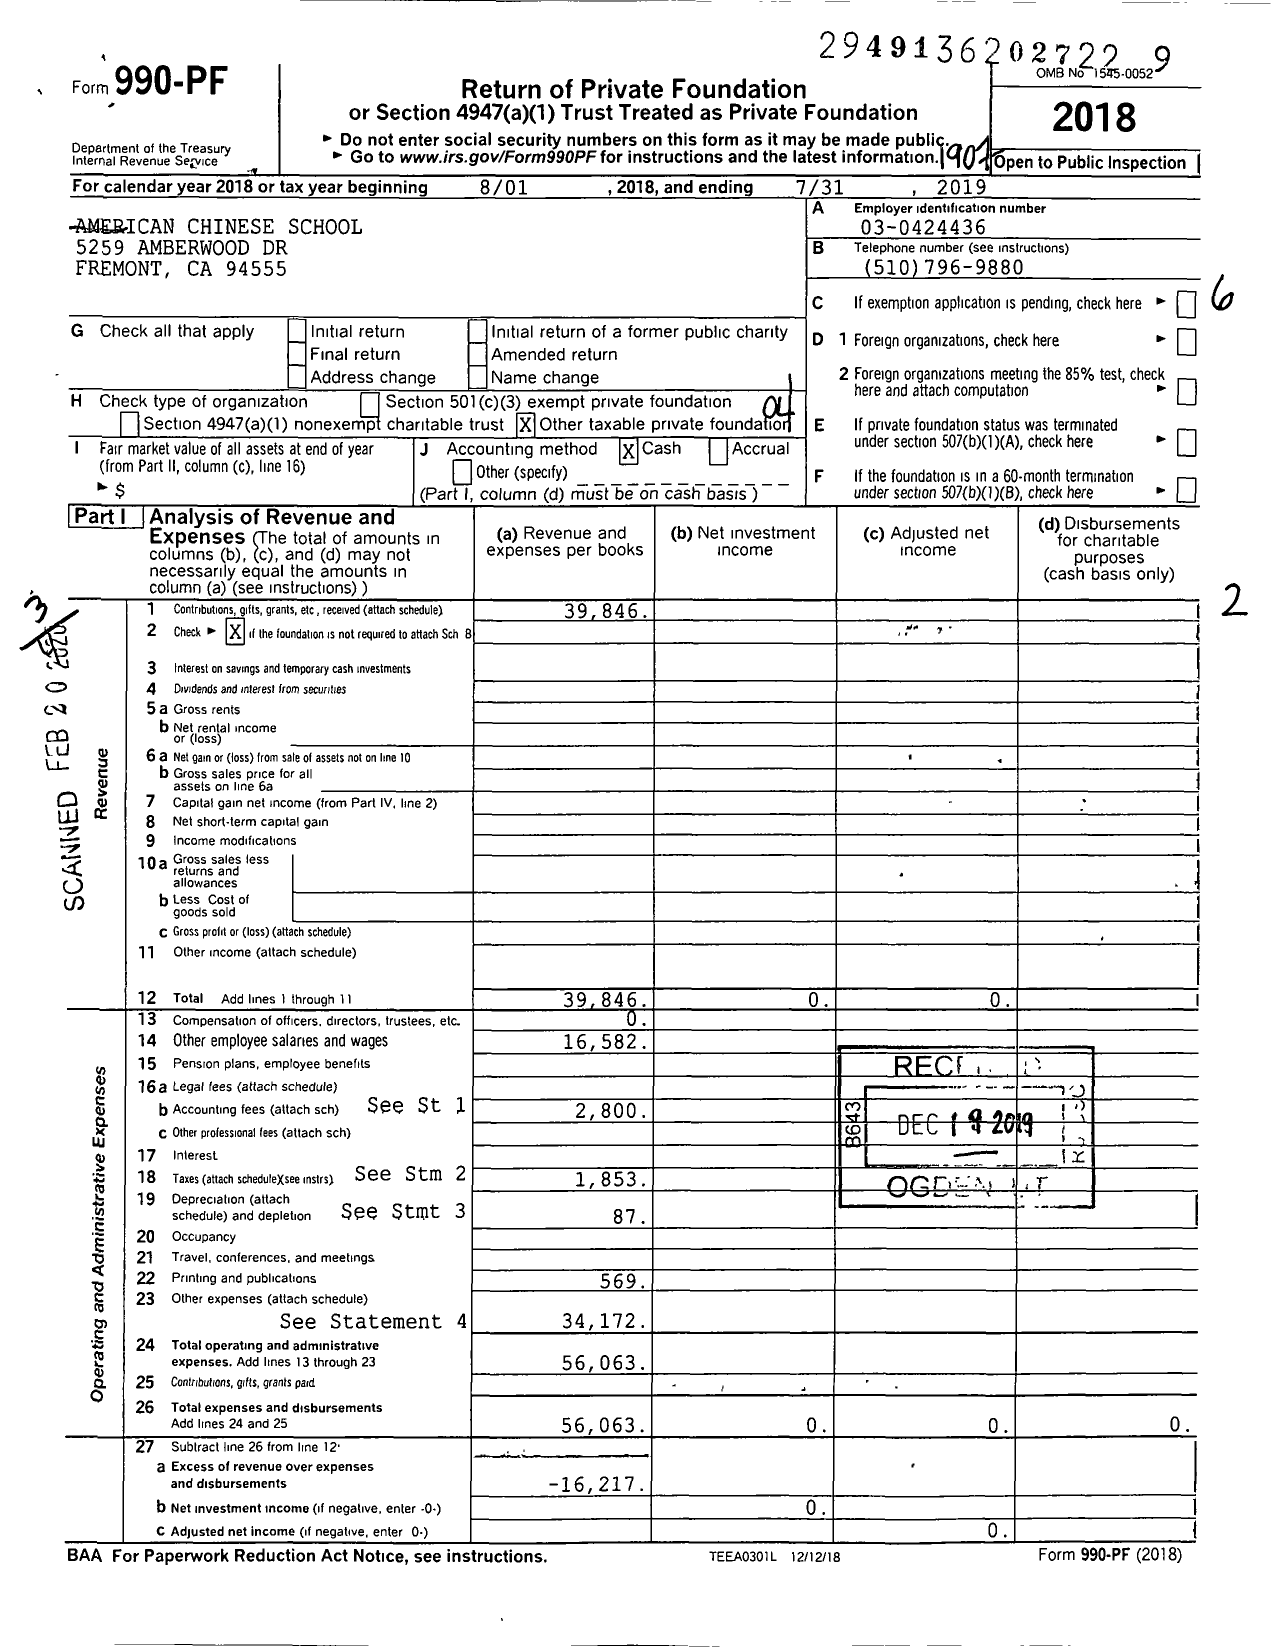 Image of first page of 2018 Form 990PF for American Chinese School